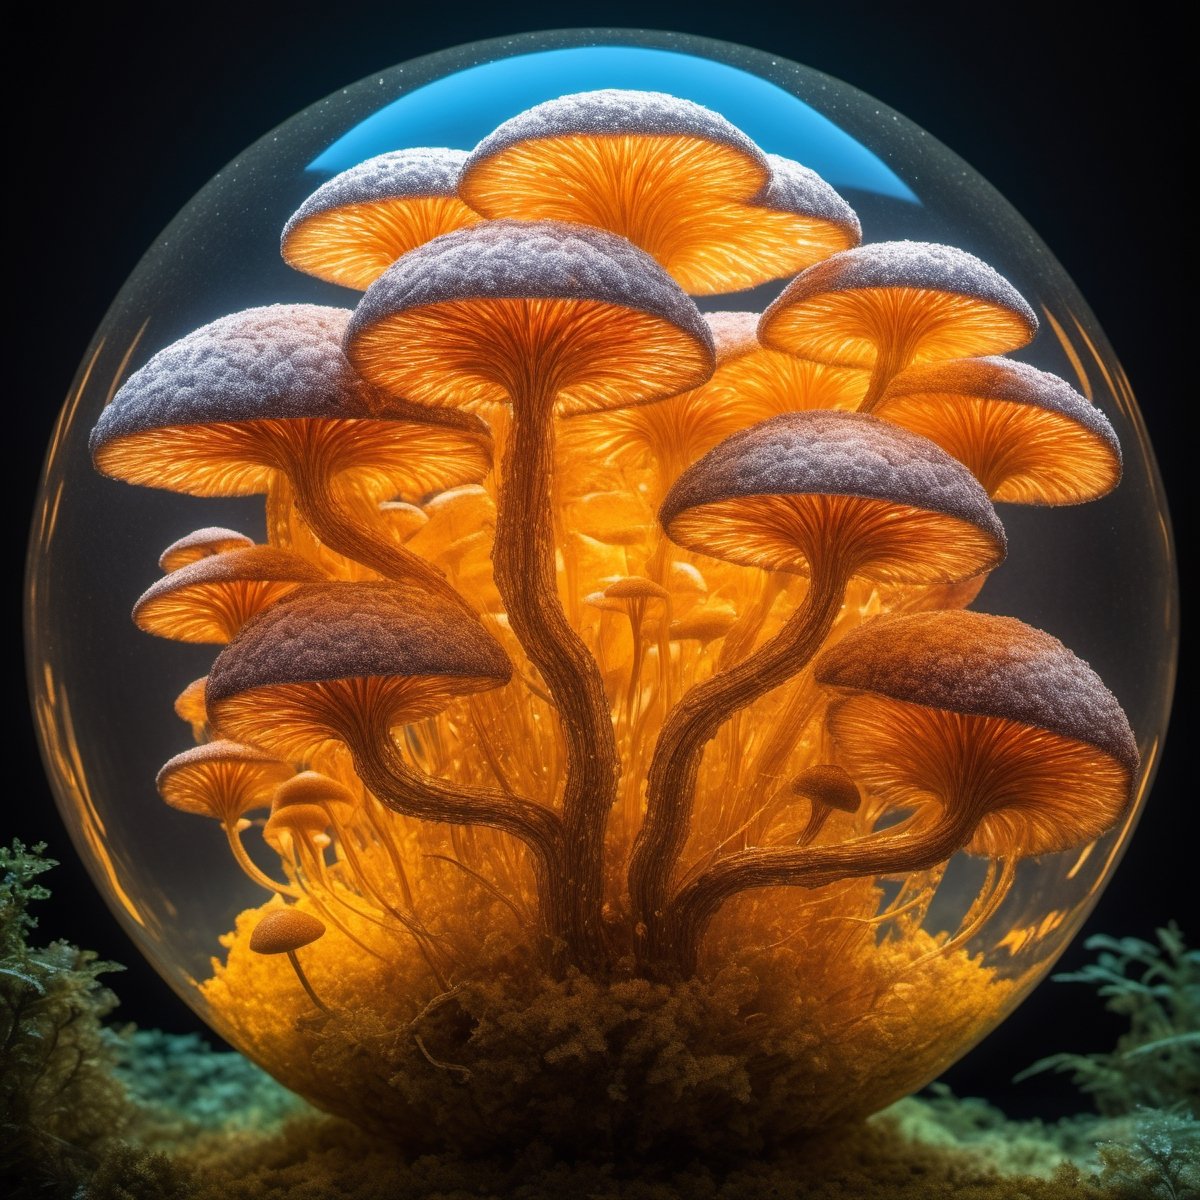 (masterpiece, best quality:1.33), Rising above, see-through, radiant, three-dimensional, imposing, powerful, majestic, a glowing fungal sphere, a surreal, abstract, chemically-created artwork filled with bio-luminescent elements